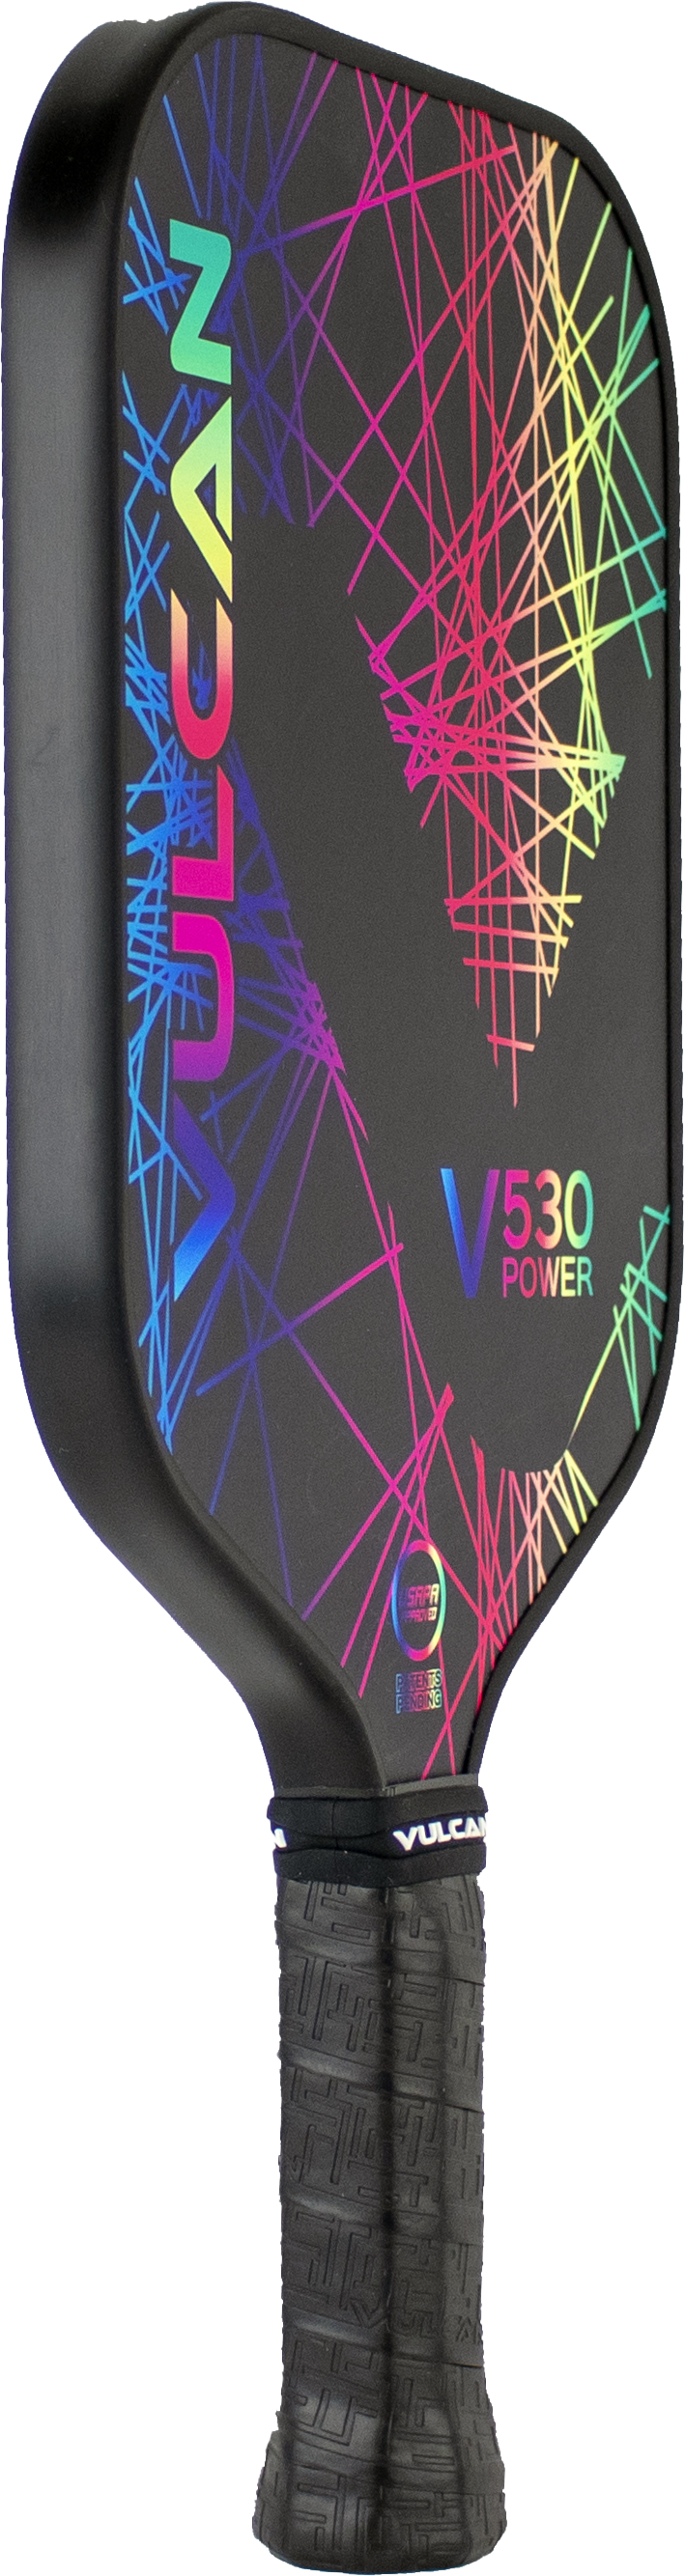 The Vulcan V530 Power Pickleball Paddle, made by Vulcan, is shown on a white background.